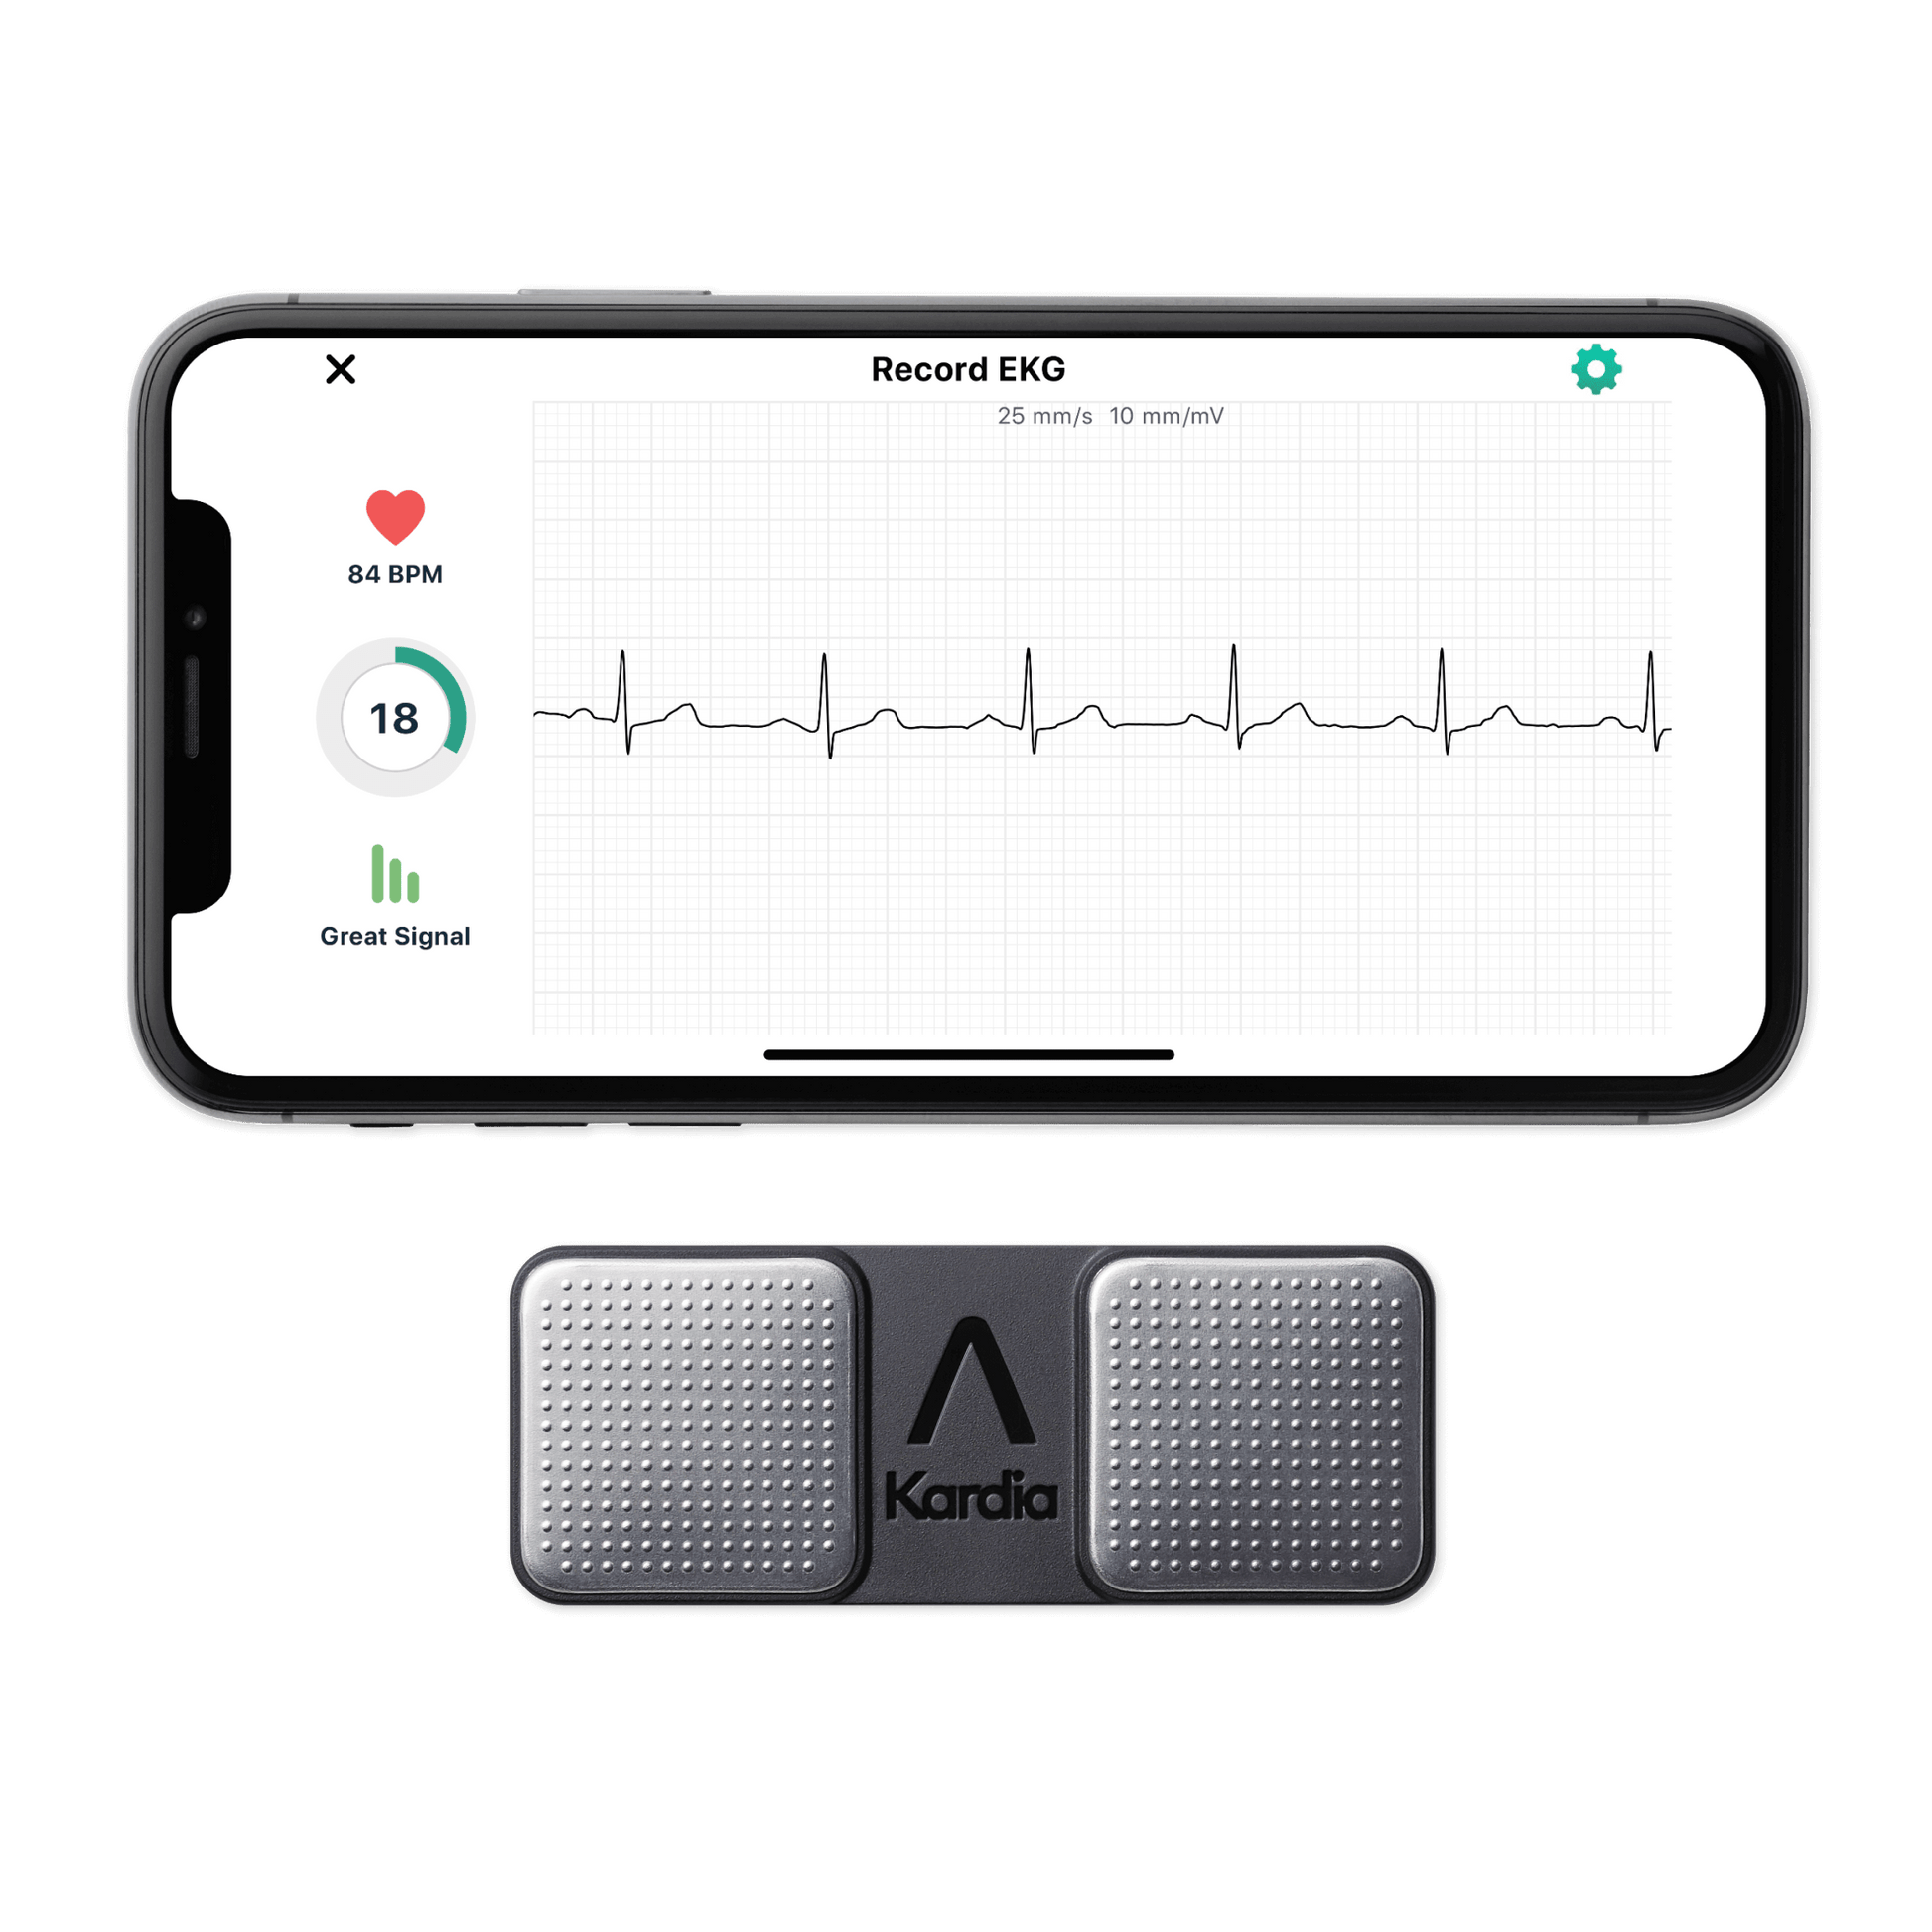 Heart Health and Kardiamobile: A Comprehensive Overview